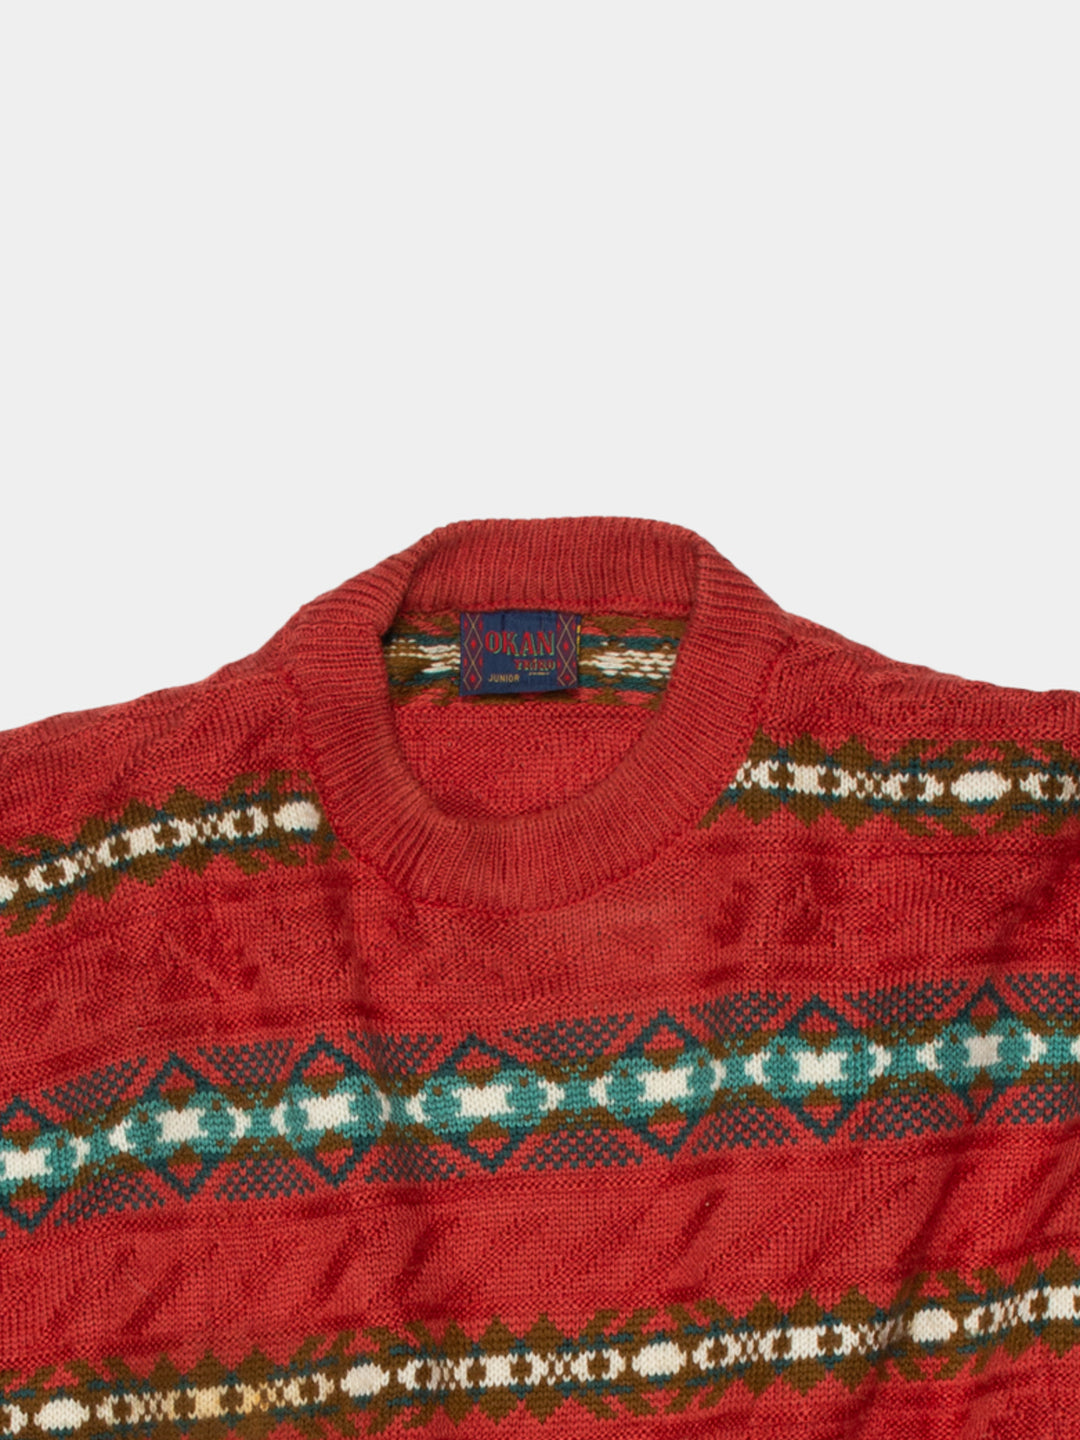 80s Abstract Sweater (L)